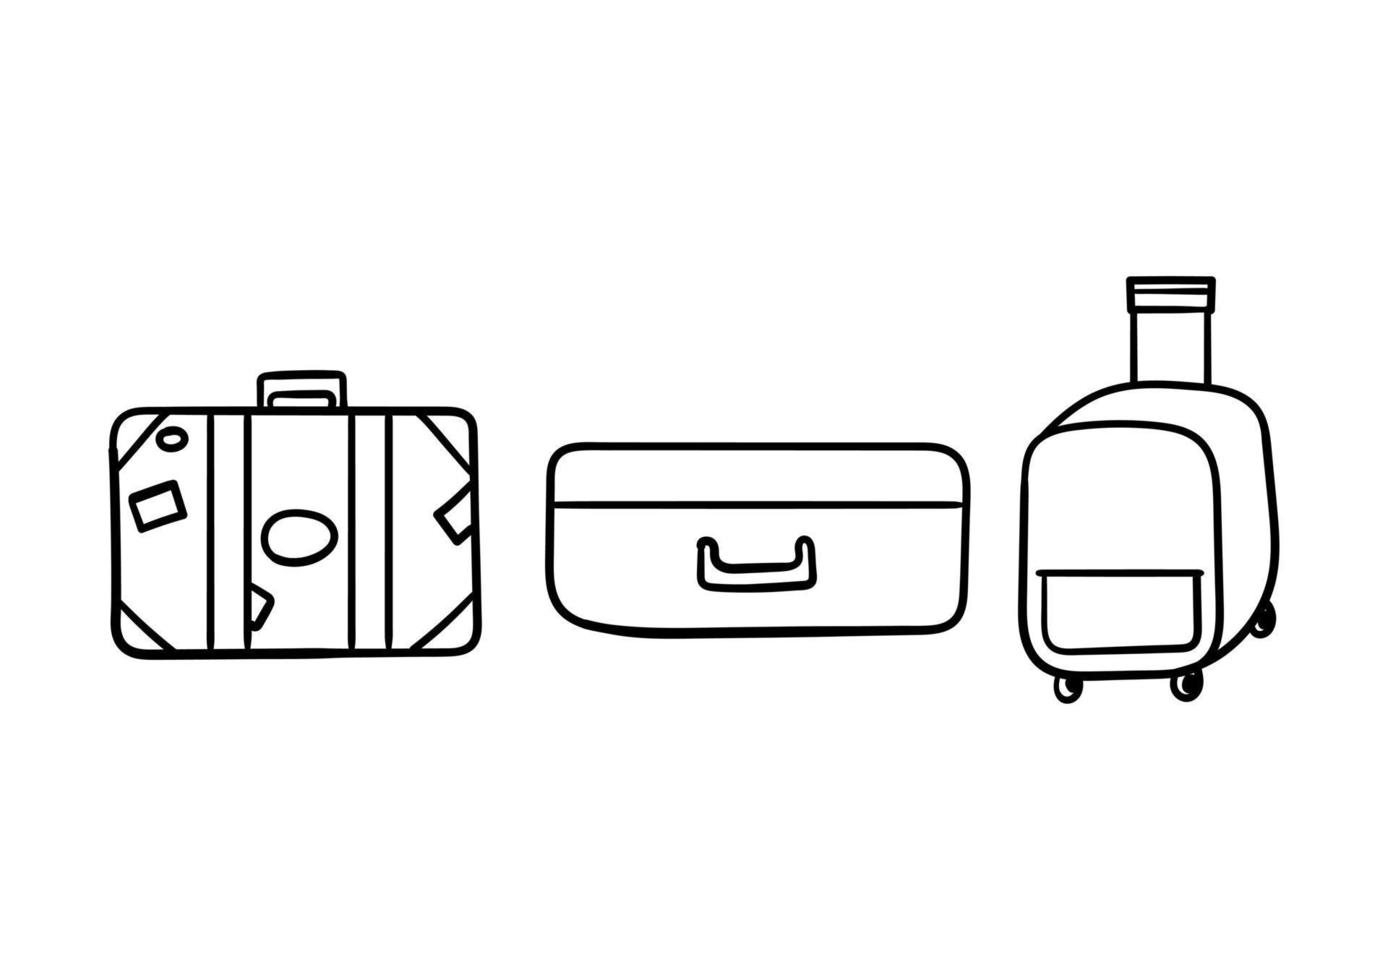 hand drawn illustration of a suitcase on a holiday theme vector